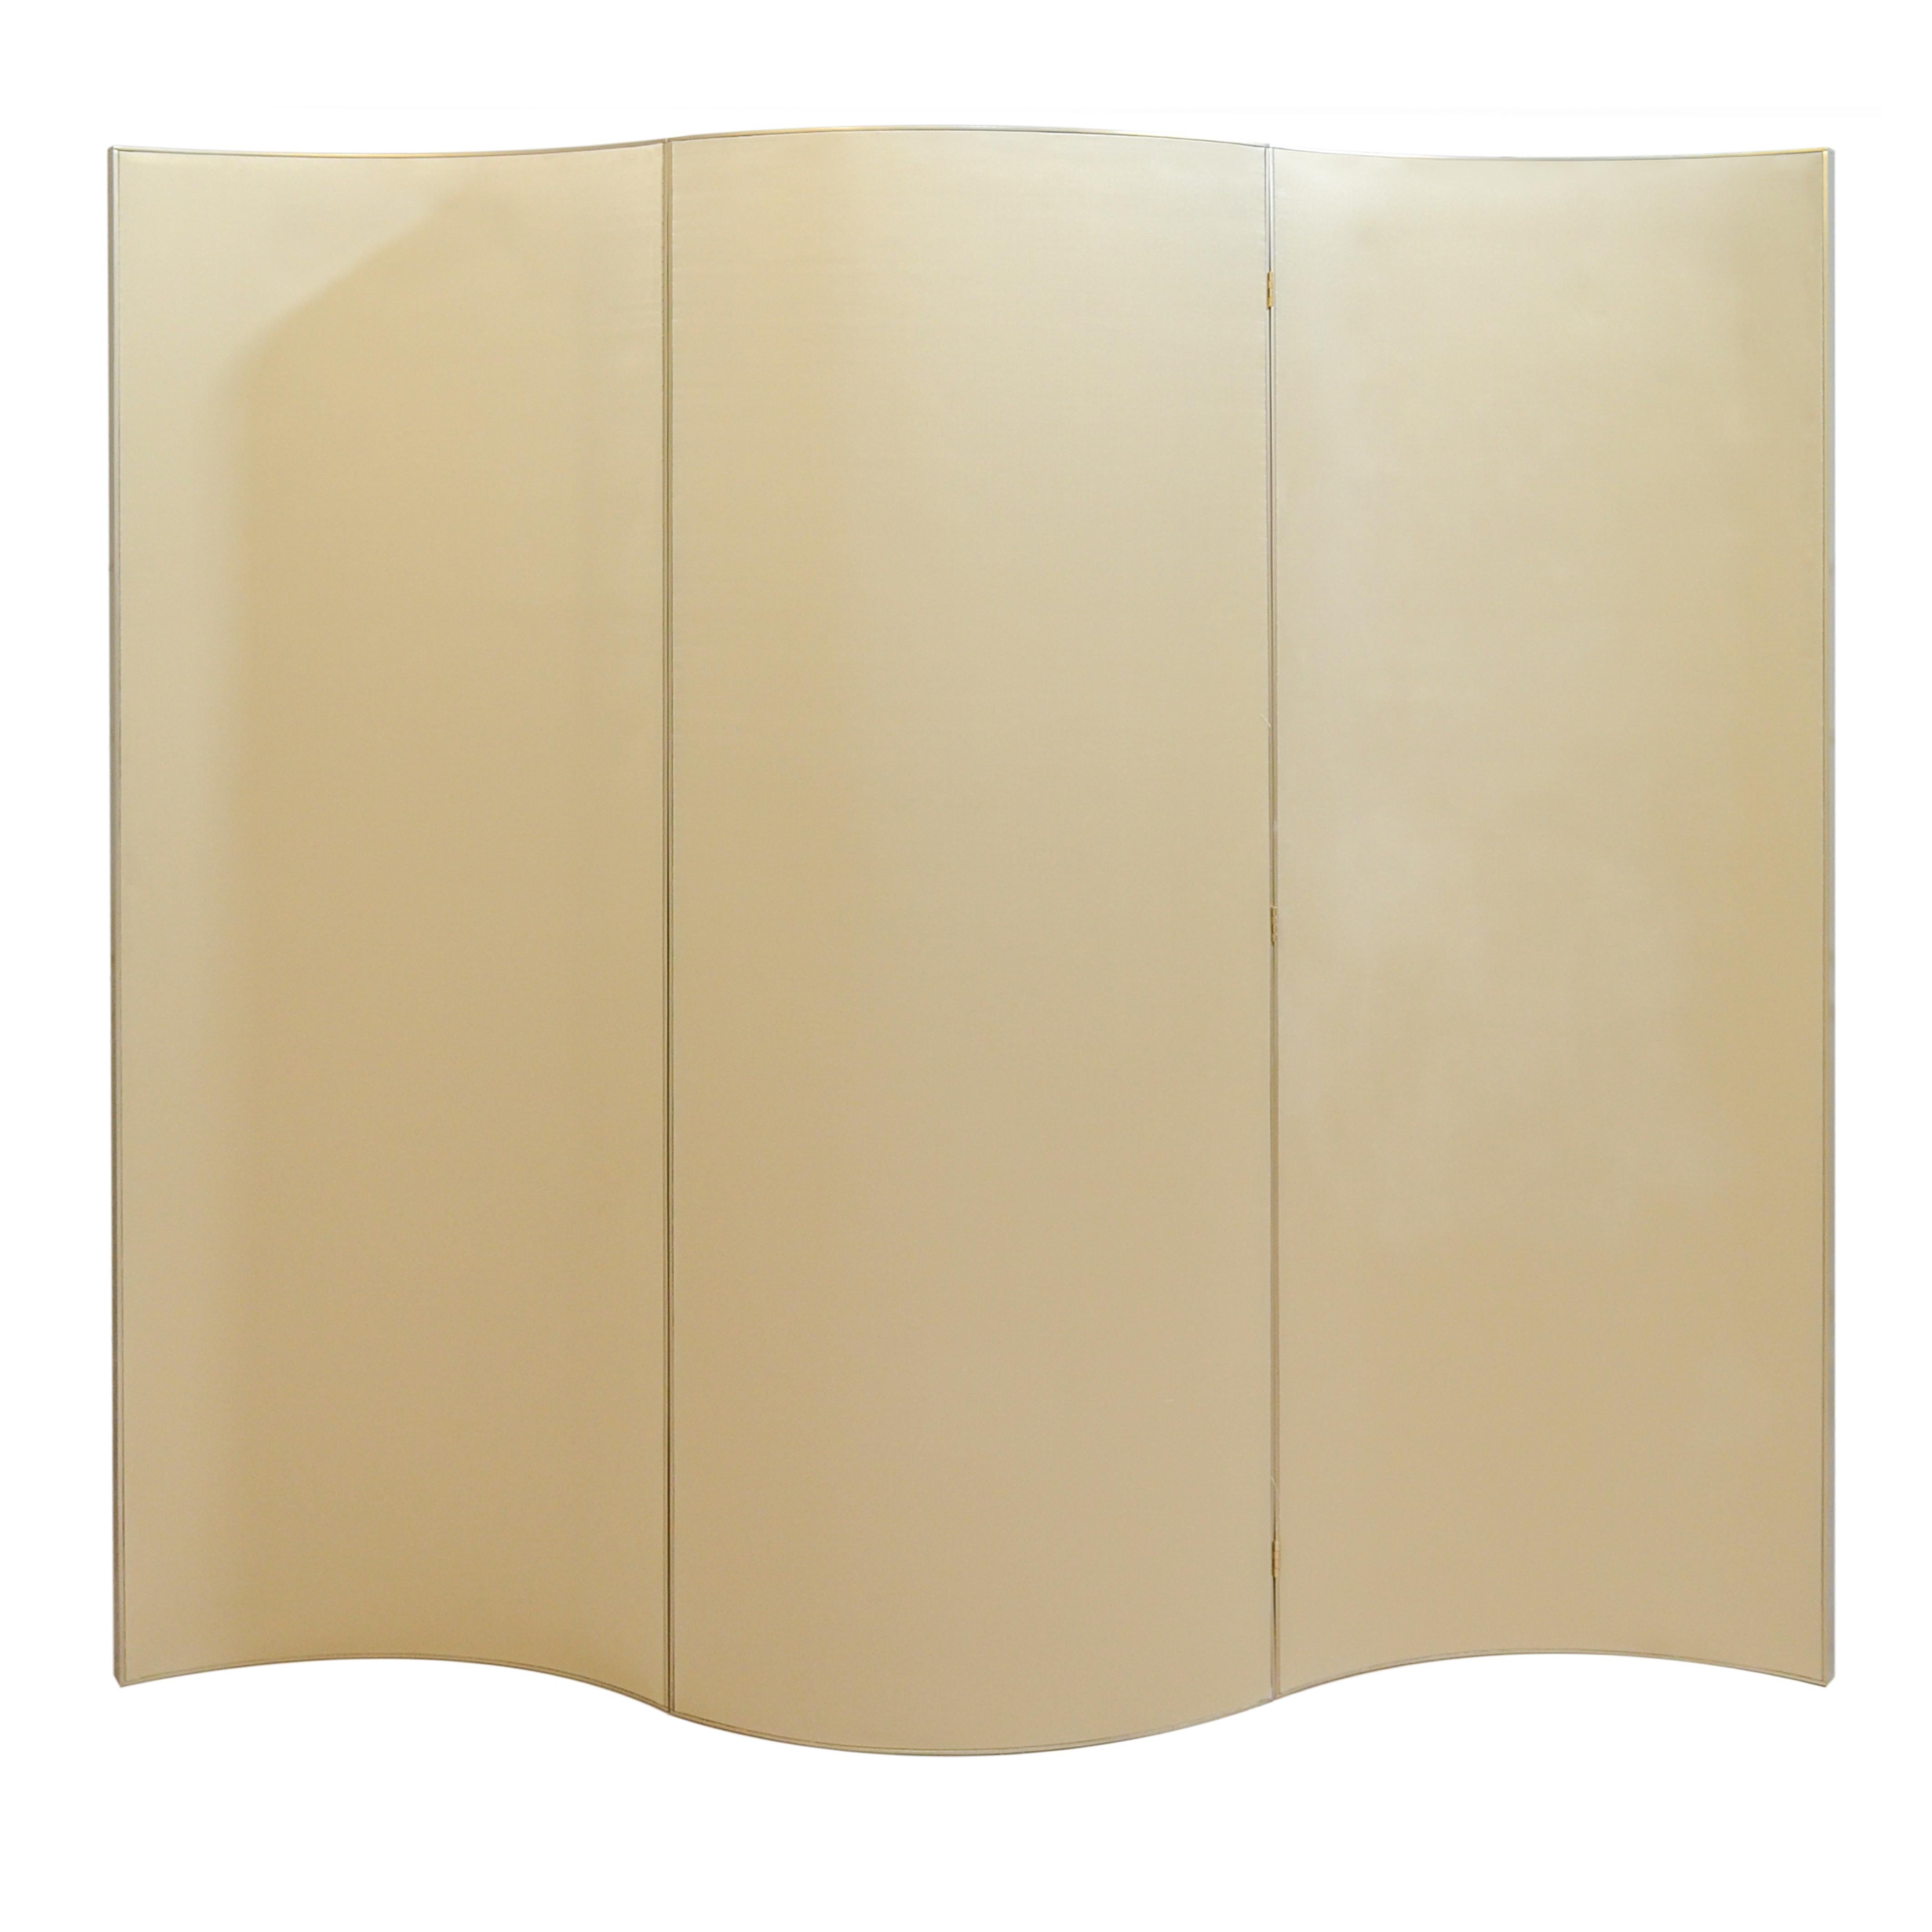 Enriched with refined details, this superb screen is a functional way to create privacy, divide areas in a large room or loft, while providing a stylish statement in a home. The structure features three curved panels connected by brass hinges in a